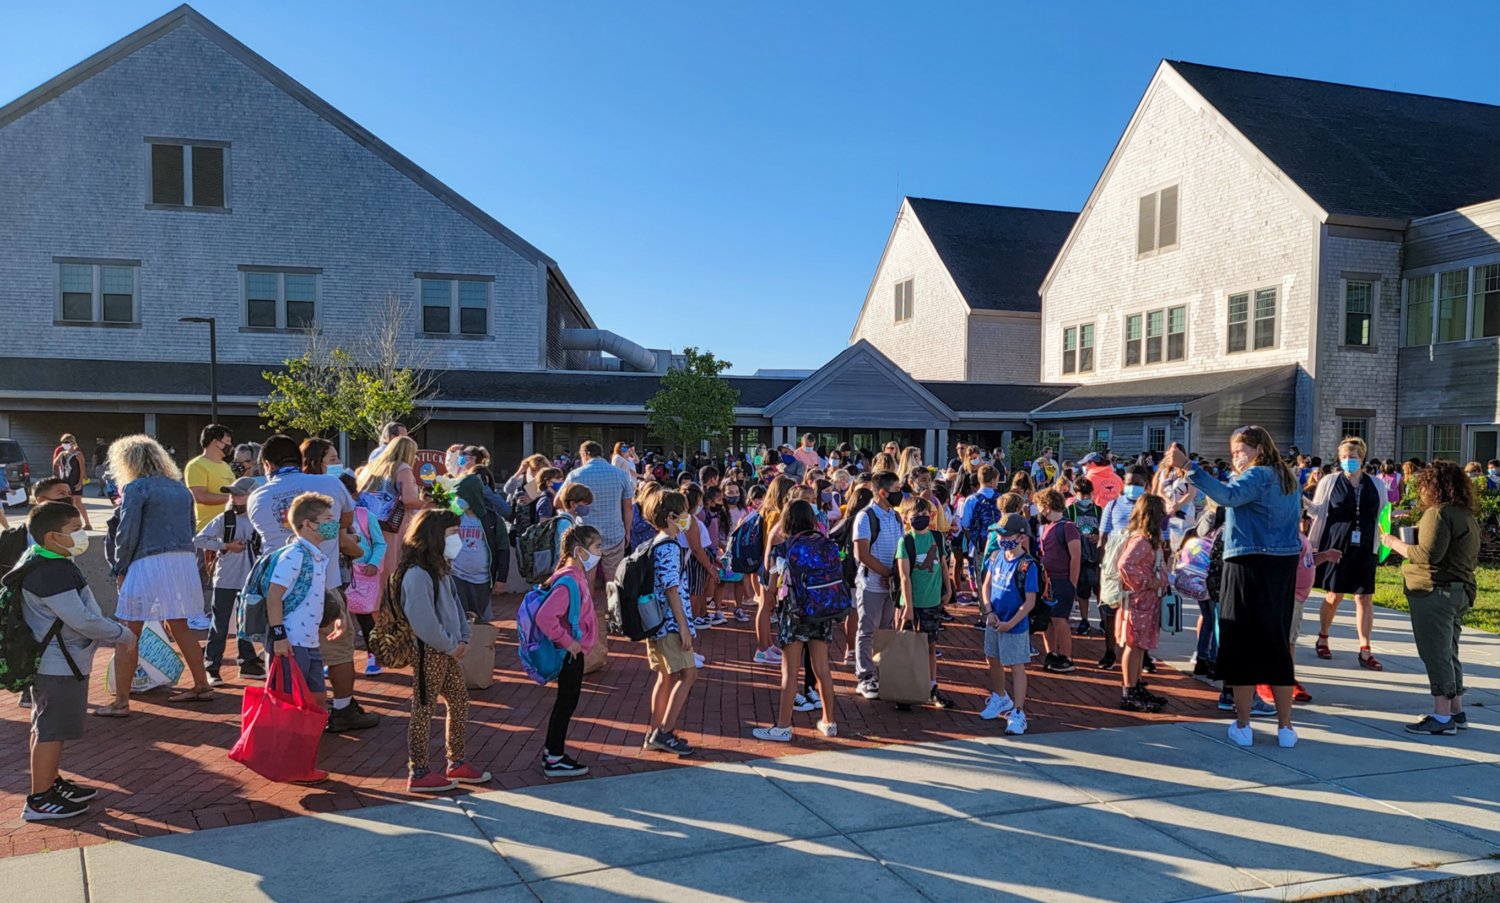 Students on the first day of classes at the Nantucket Intermediate School Tuesday.